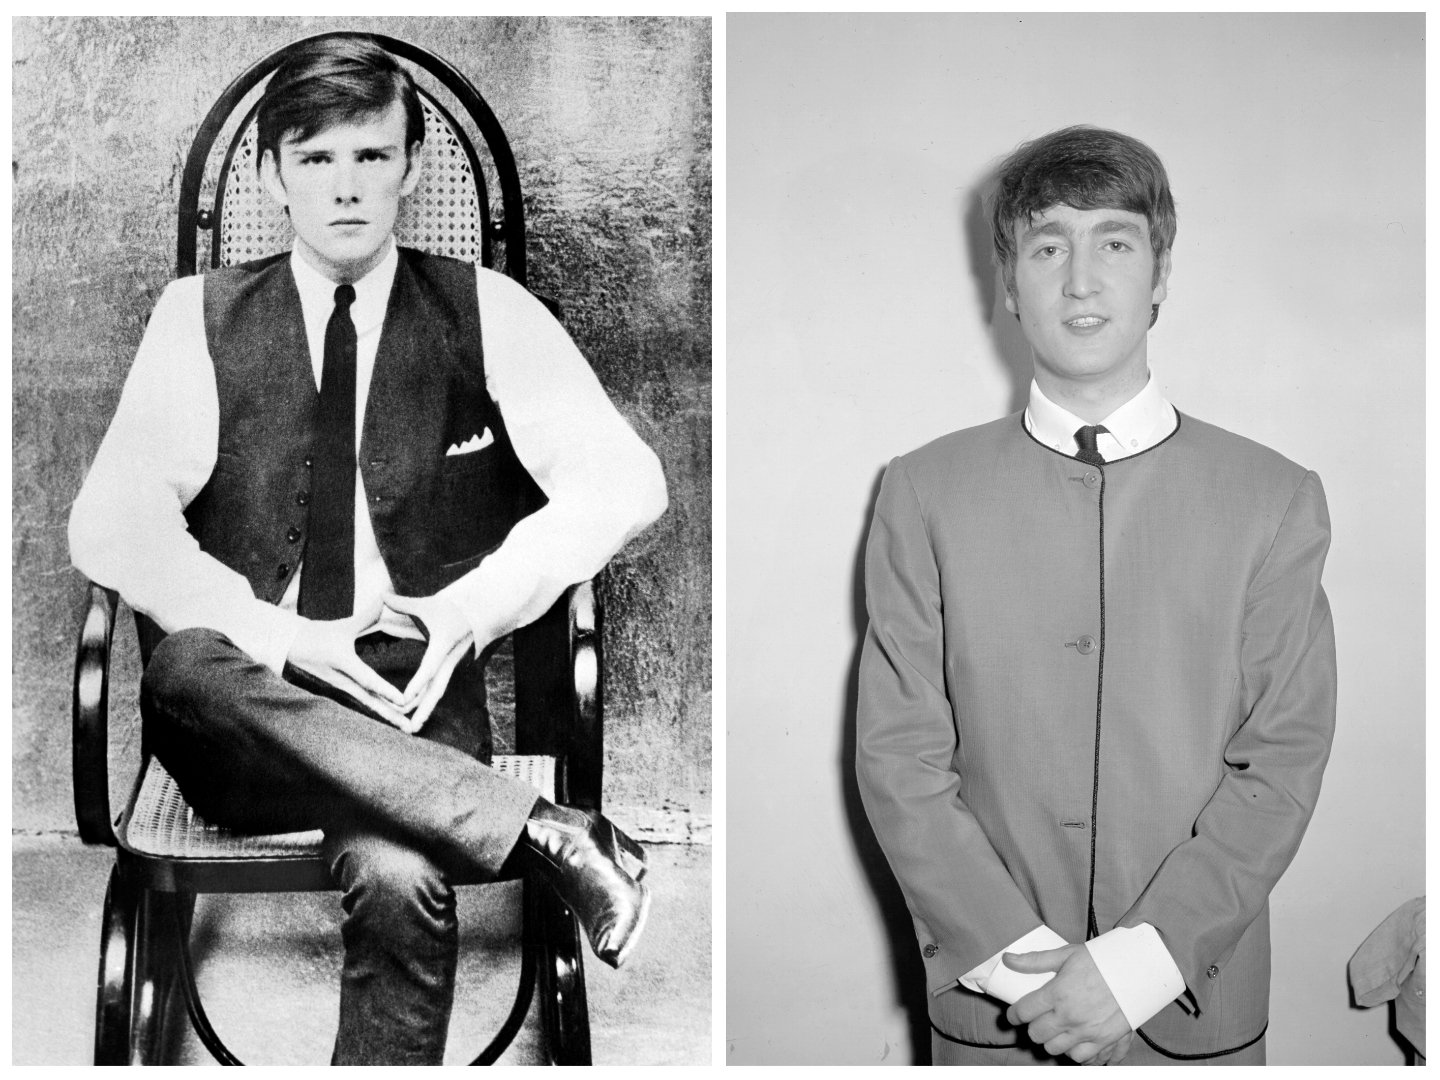 Stuart Sutcliffe sits in a wooden chair. John Lennon wears a suit and stands in fron mof a blank wall.